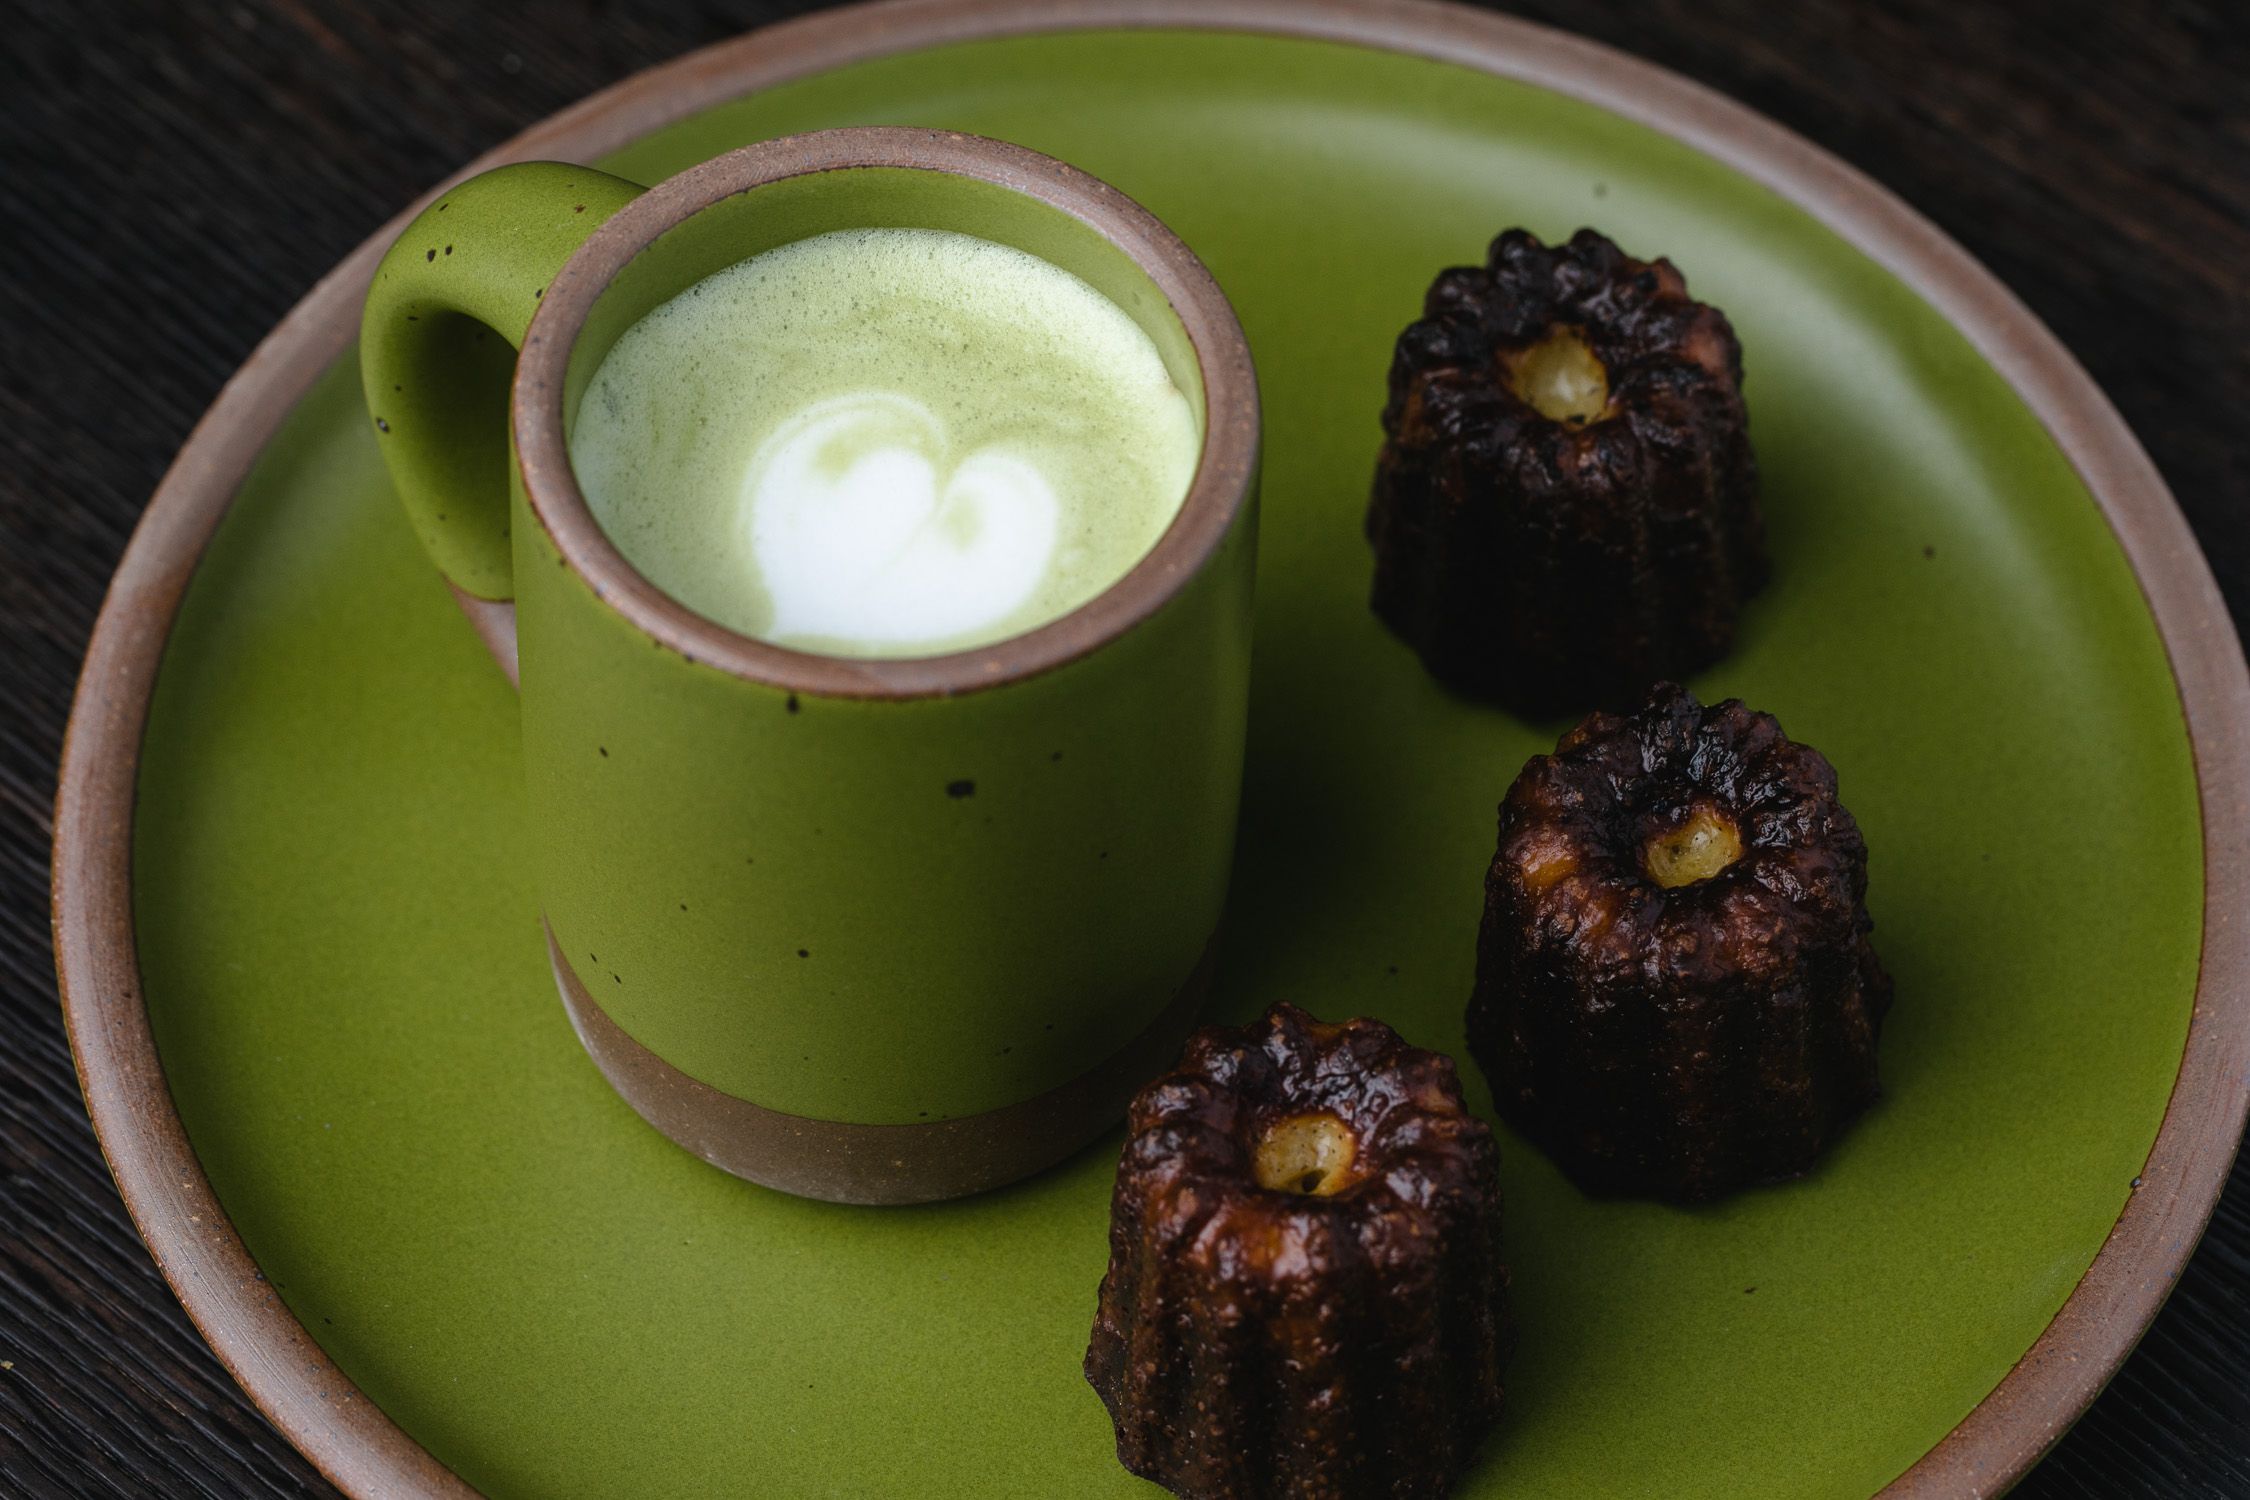 Matcha latte with caneles in Fiddlehead mug and side plate